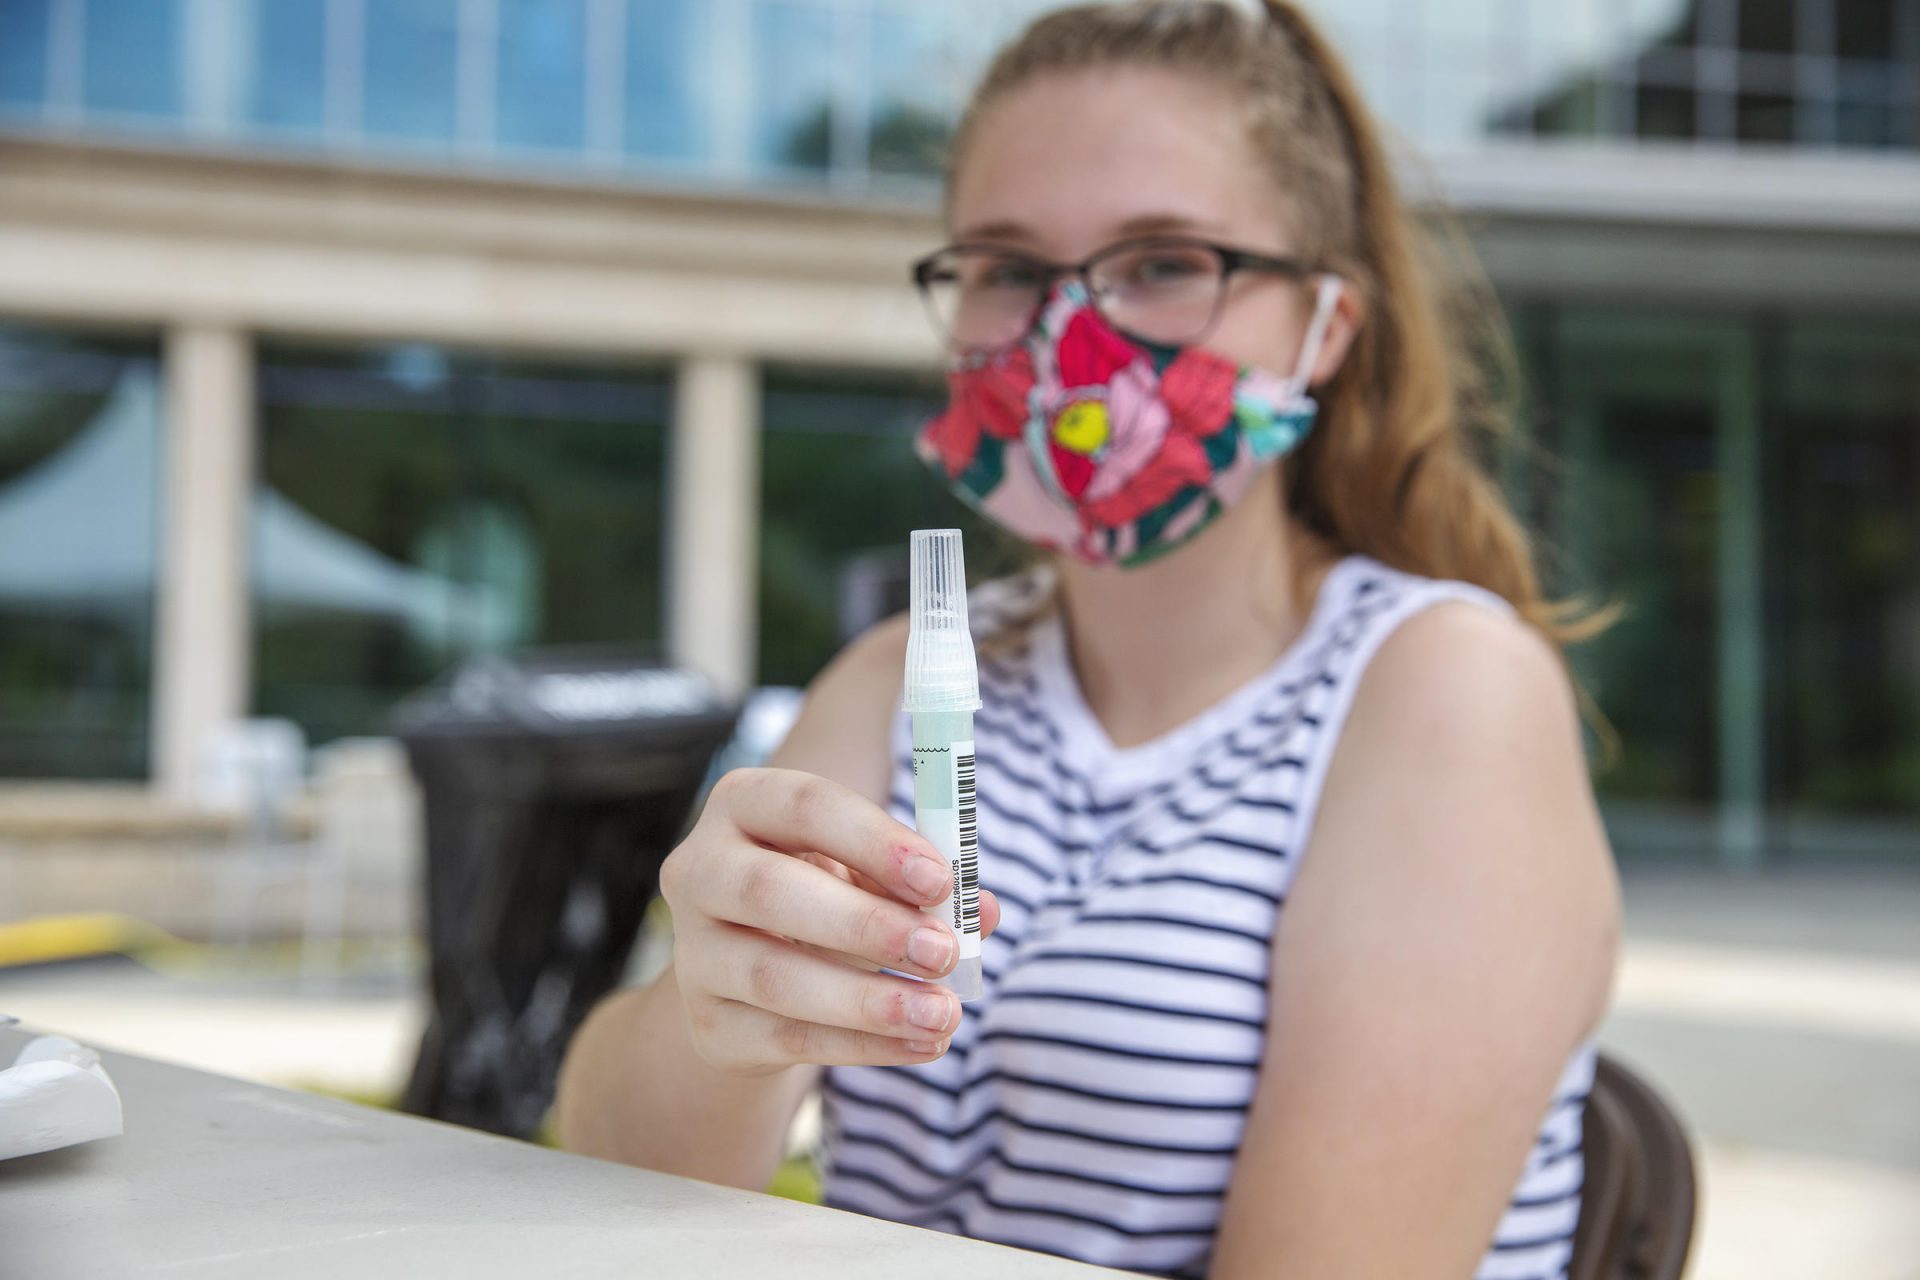 Penn State student Kaitlyn Harris did an asymptomatic saliva test at a mobile testing site in August. The university said Tuesday there are 433 total COVID-19 cases university-wide.